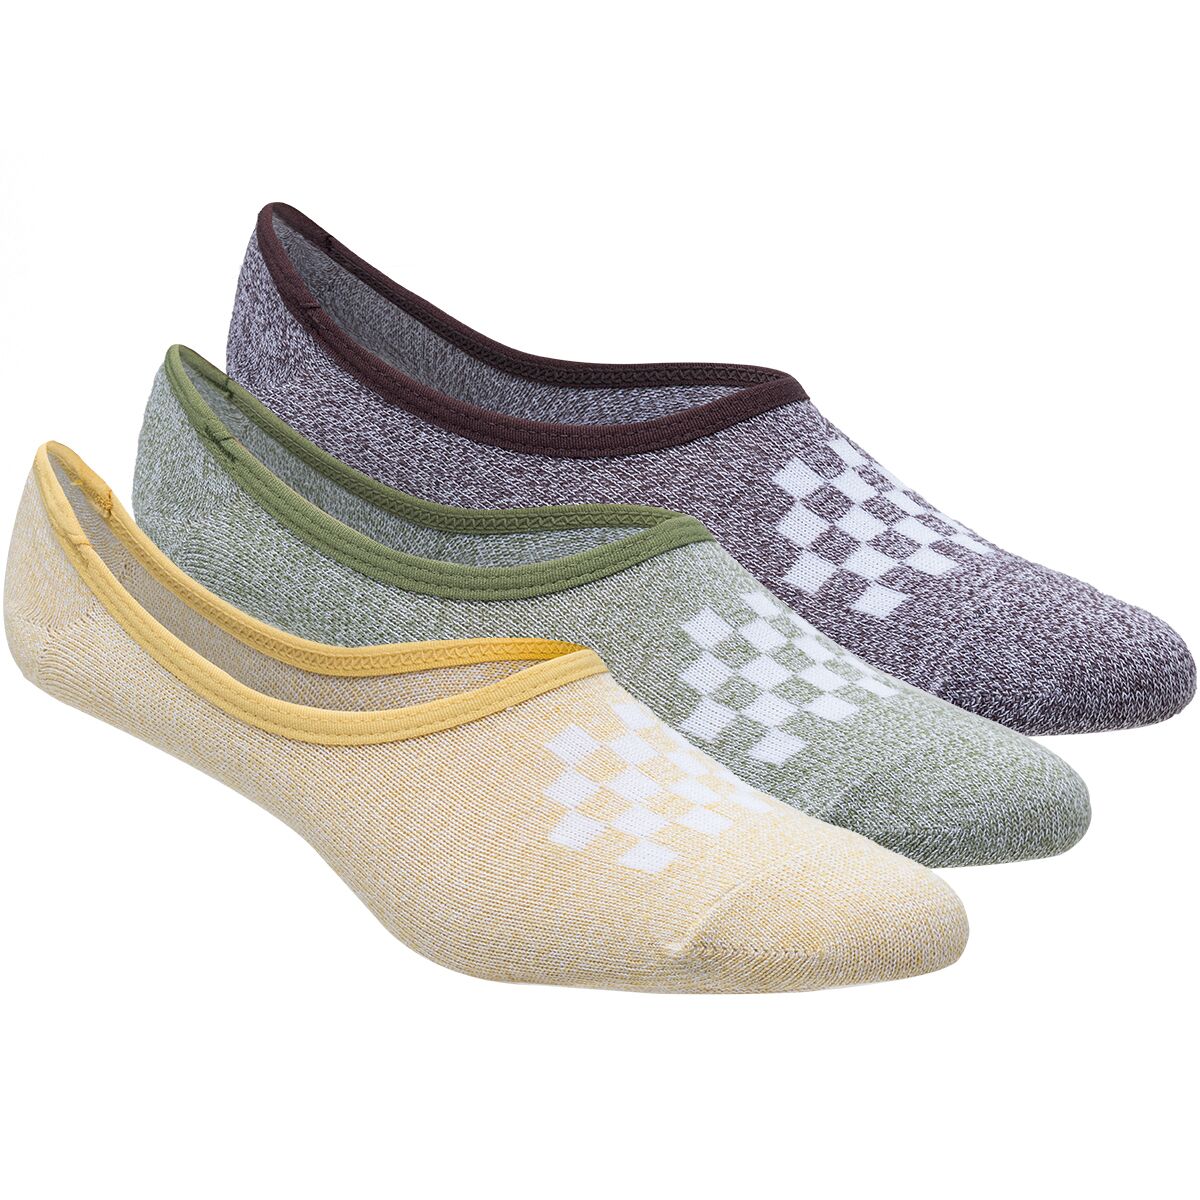 Vans Classic Marled Canoodle Sock - 3-Pack - Women's